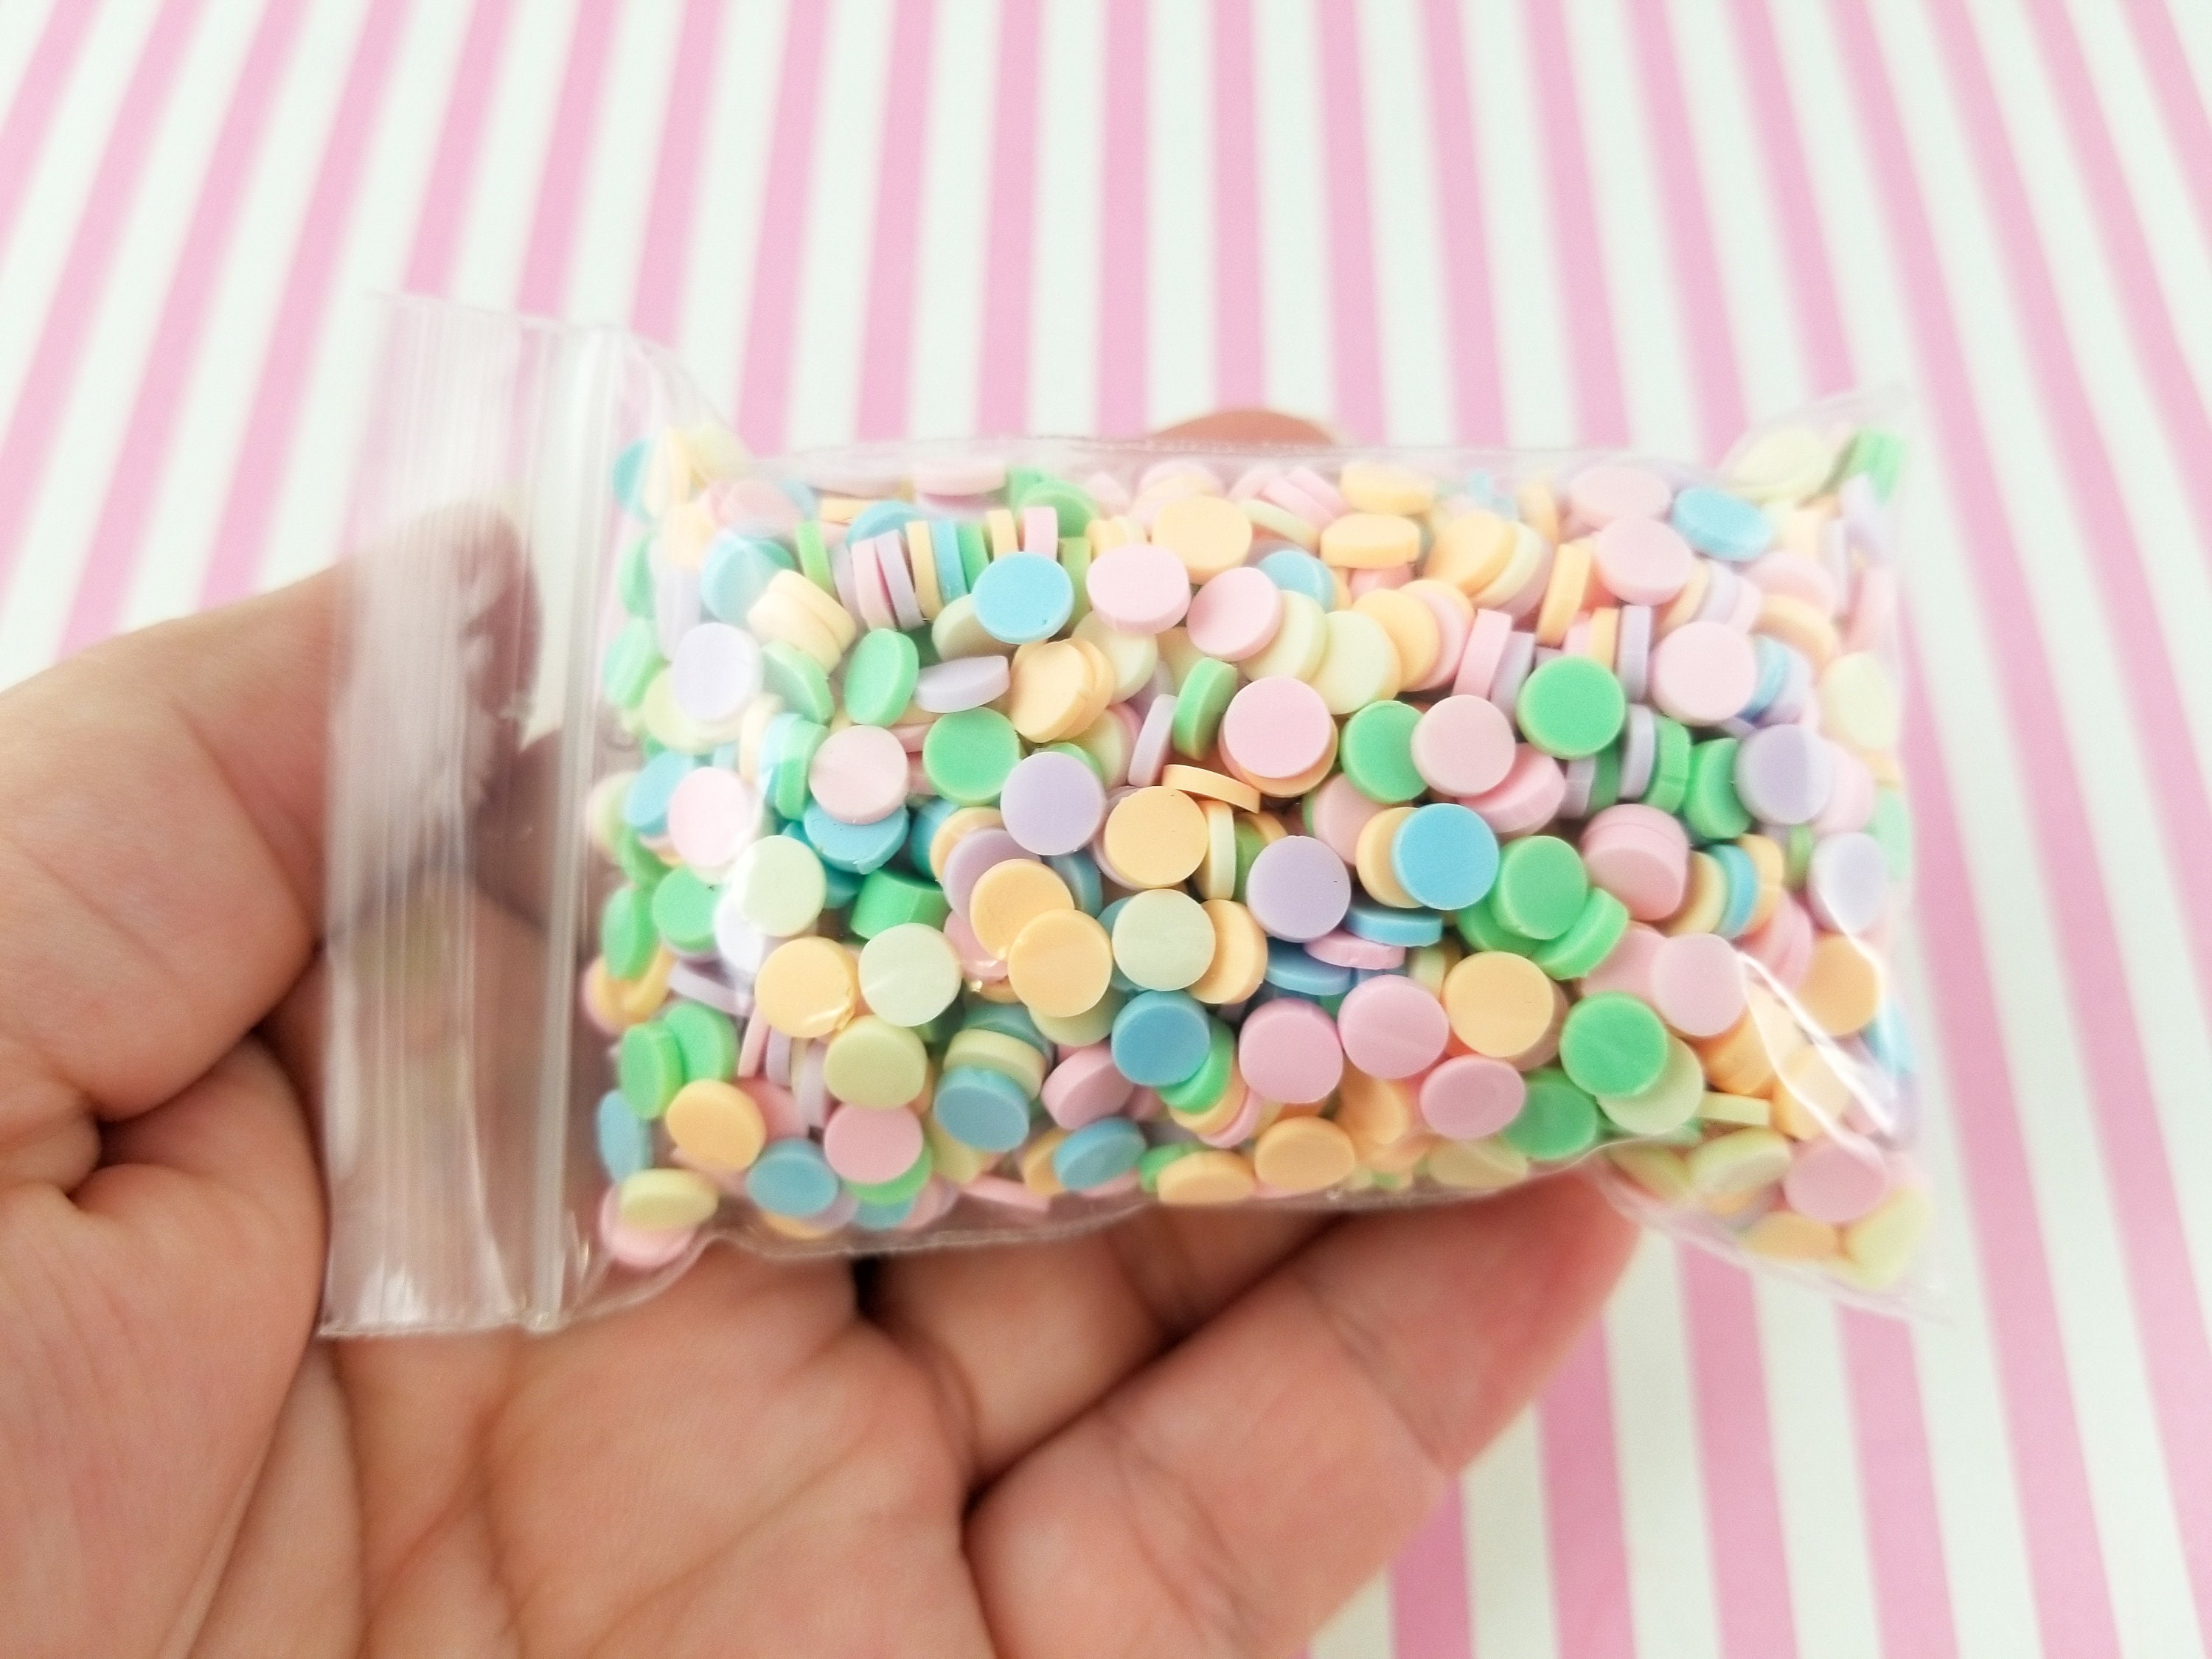 Colorful Polymer Clay Sprinkles | Fake Rainbow Toppings | Faux Round Dot  Confetti Sprinkles | Kawaii Cupcake Jewelry Making (Assorted Mix / 5 grams)